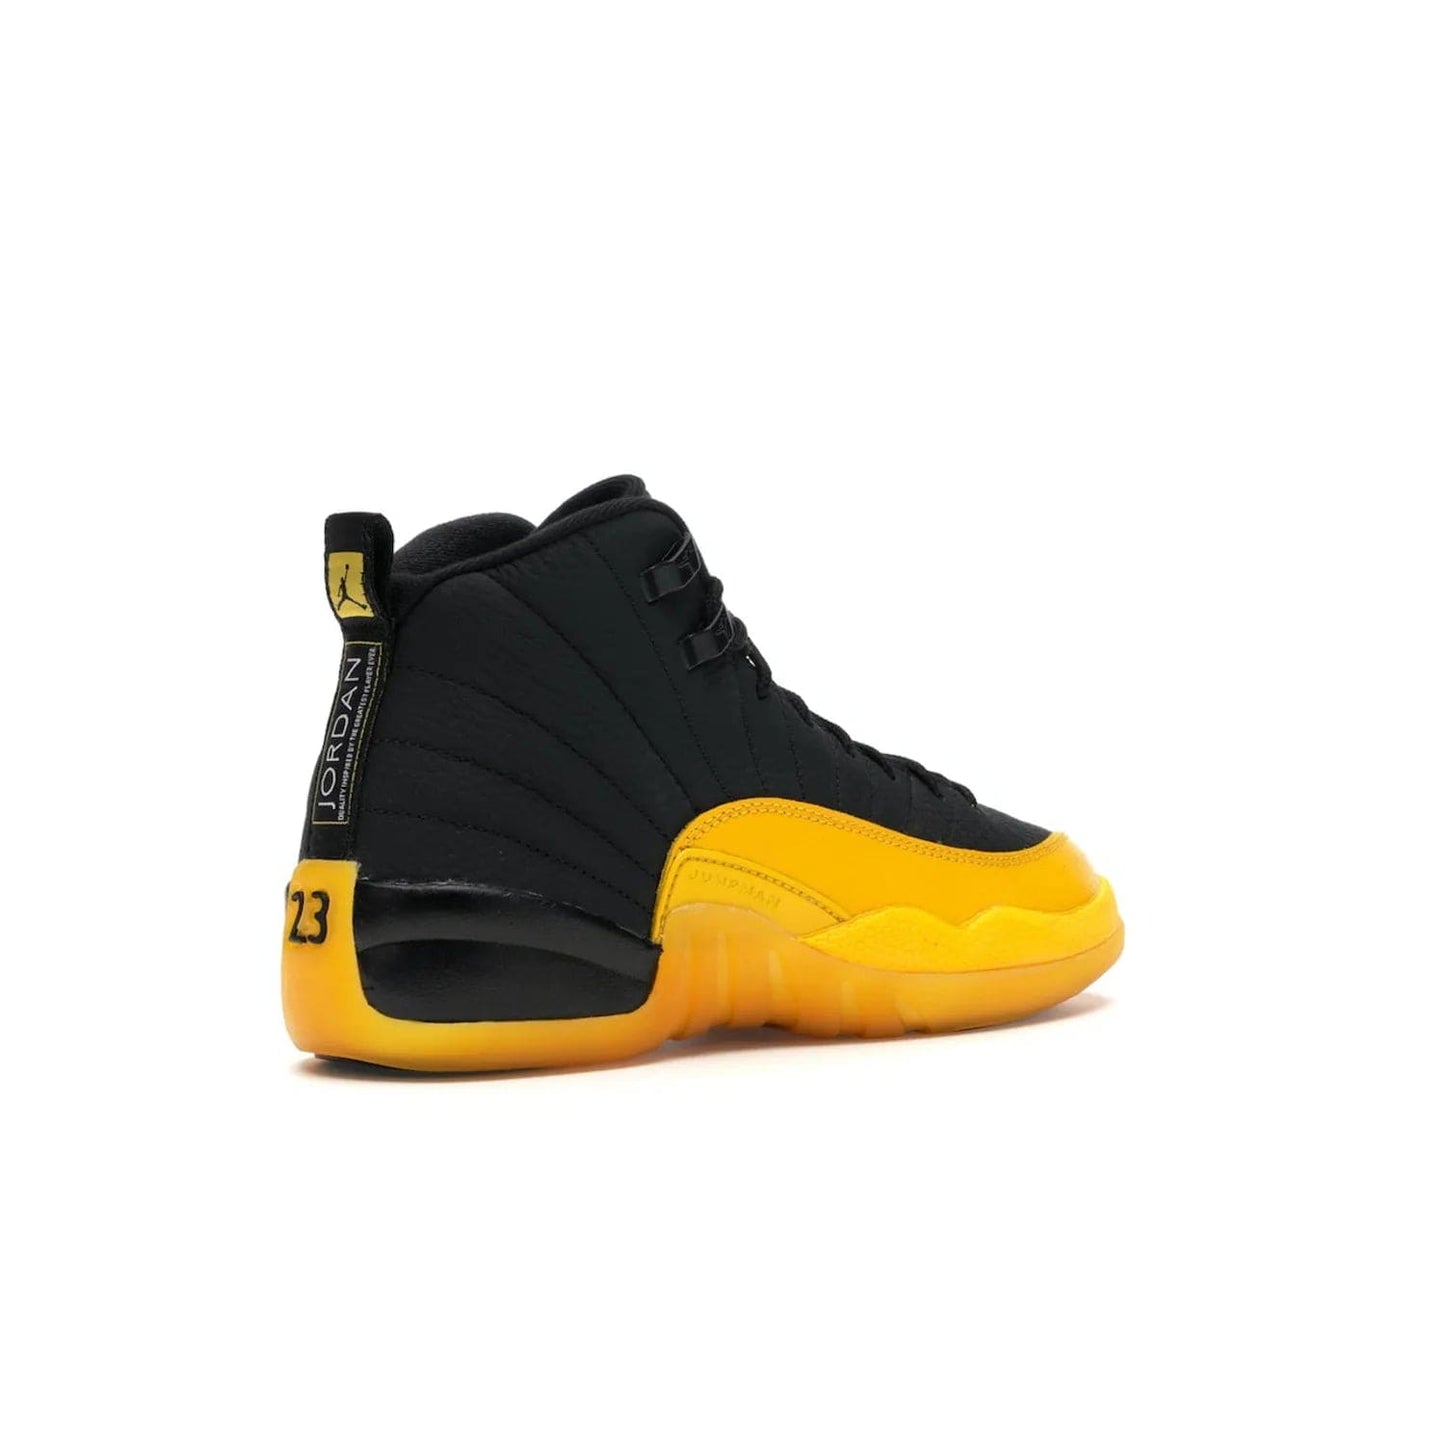 Jordan 12 Retro Black University Gold (GS) - Image 33 - Only at www.BallersClubKickz.com - Upgrade your kid's shoe collection with the Jordan 12 Retro Black University Gold. With classic style, black tumbled leather upper, and University Gold accents, it's a great summer look. Out July 2020.